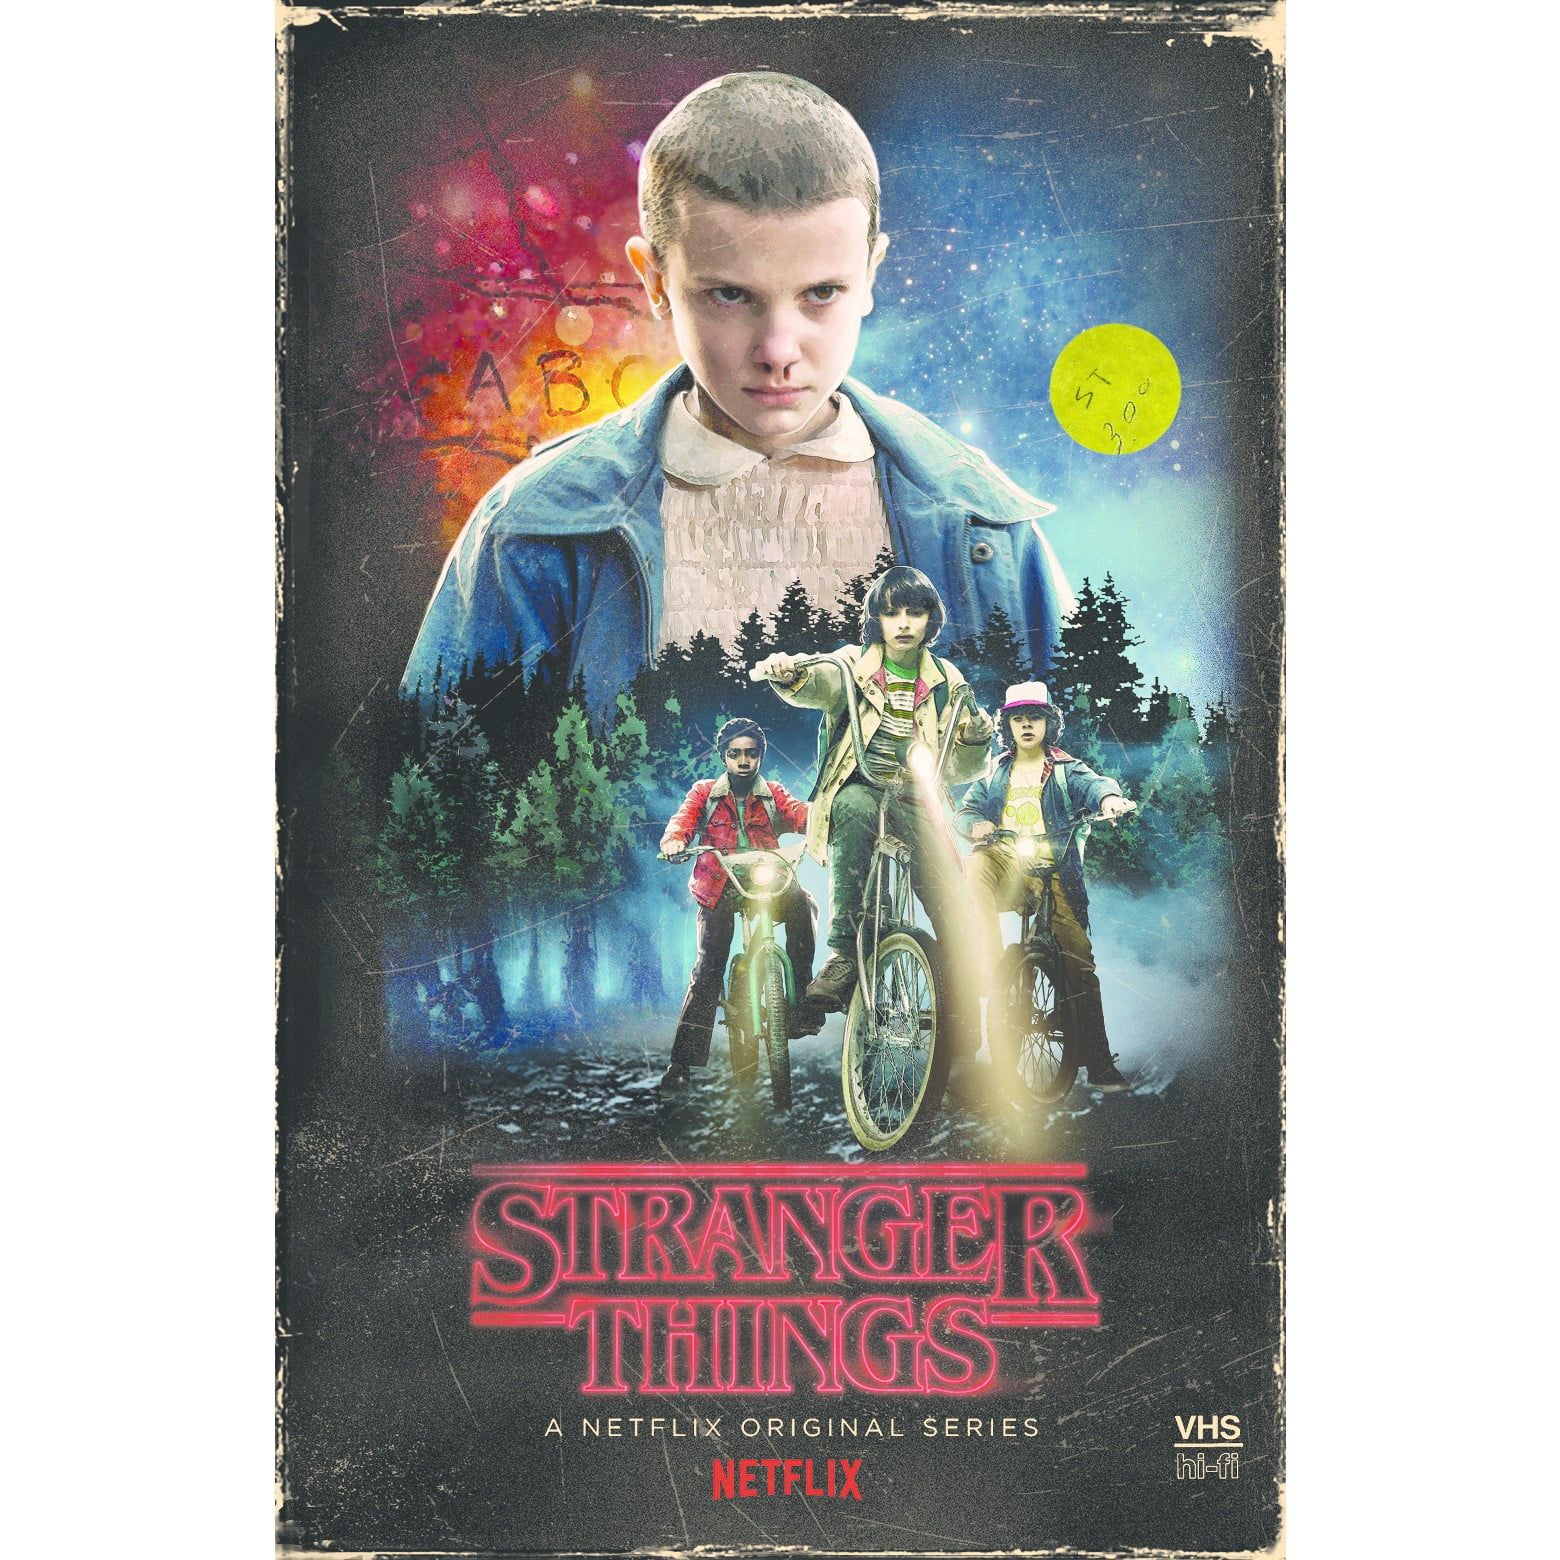 NETFLIX STRANGER THINGS COLLECTOR'S BOX BRAND NEW SEALED OFFICIAL MERCHANDISE 